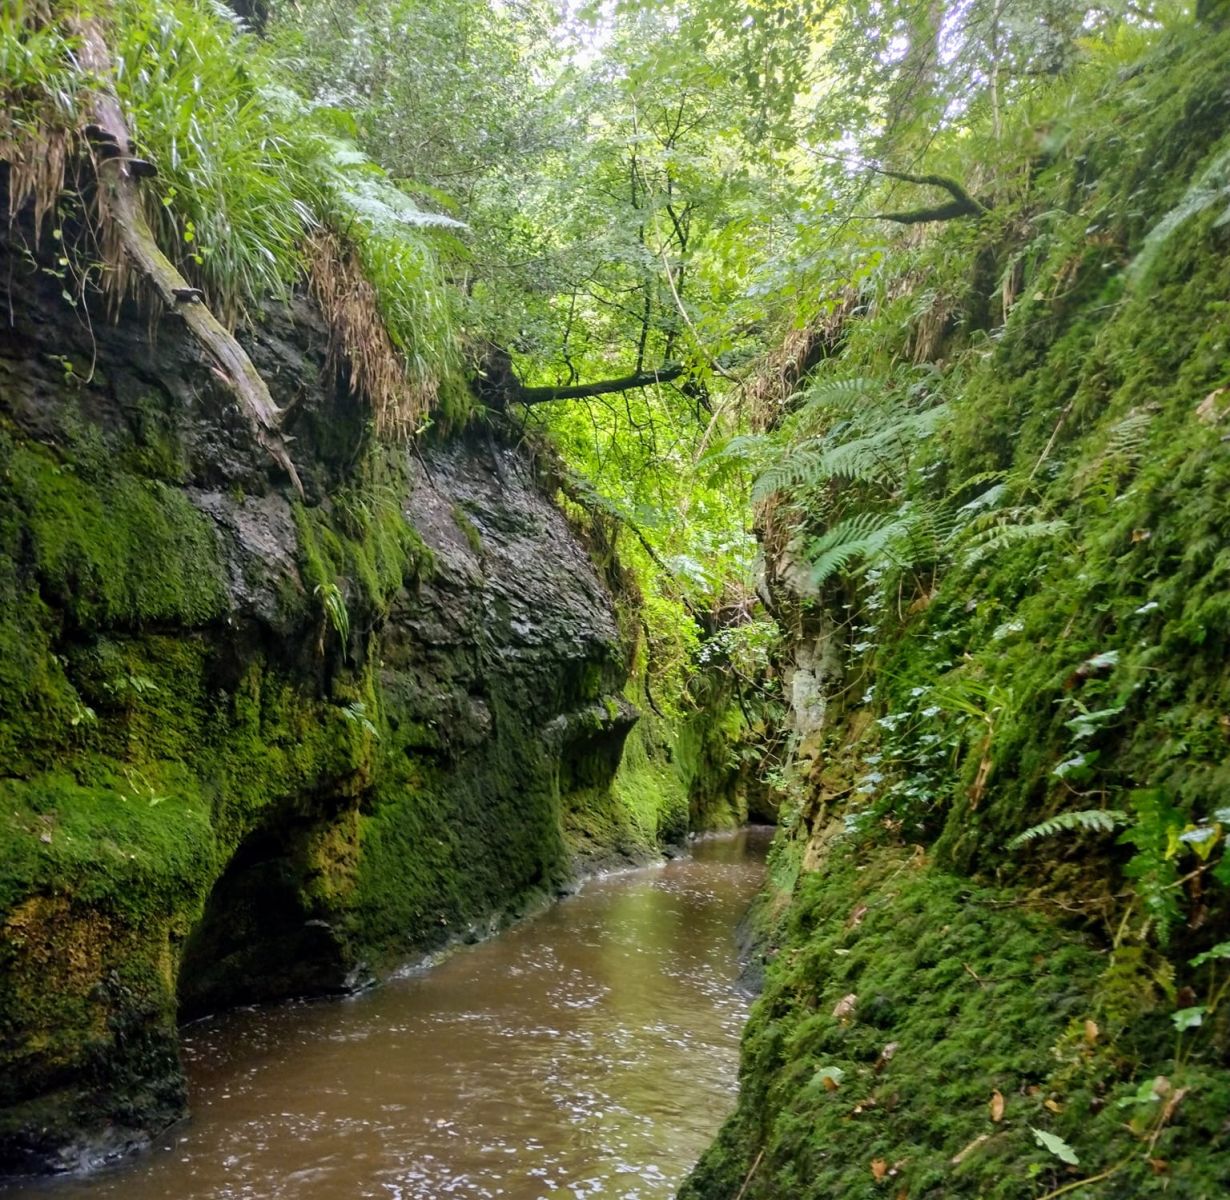 Entrance to the "Whale's Belly"  in the gorge of Boquhan Burn